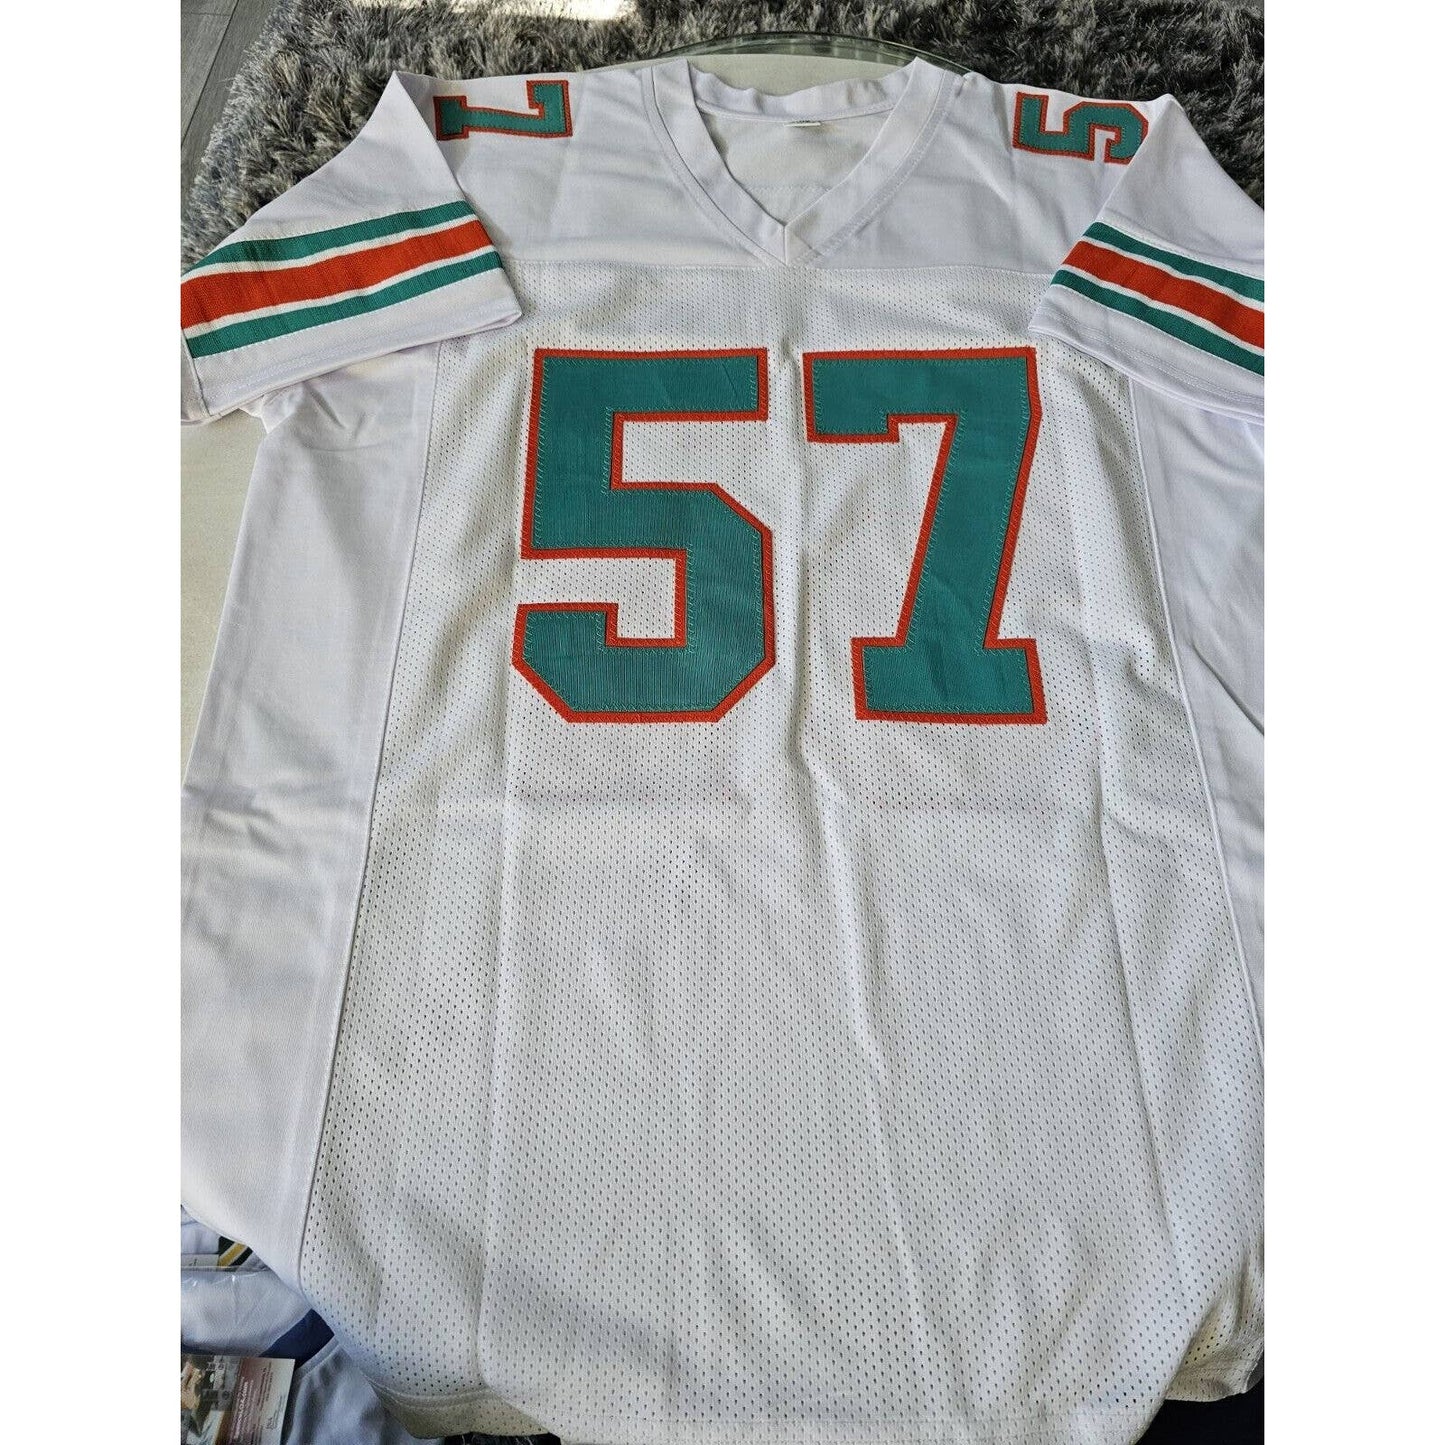 Dwight Stephenson Autographed/Signed Jersey Beckett Sticker Miami Dolphins HOF